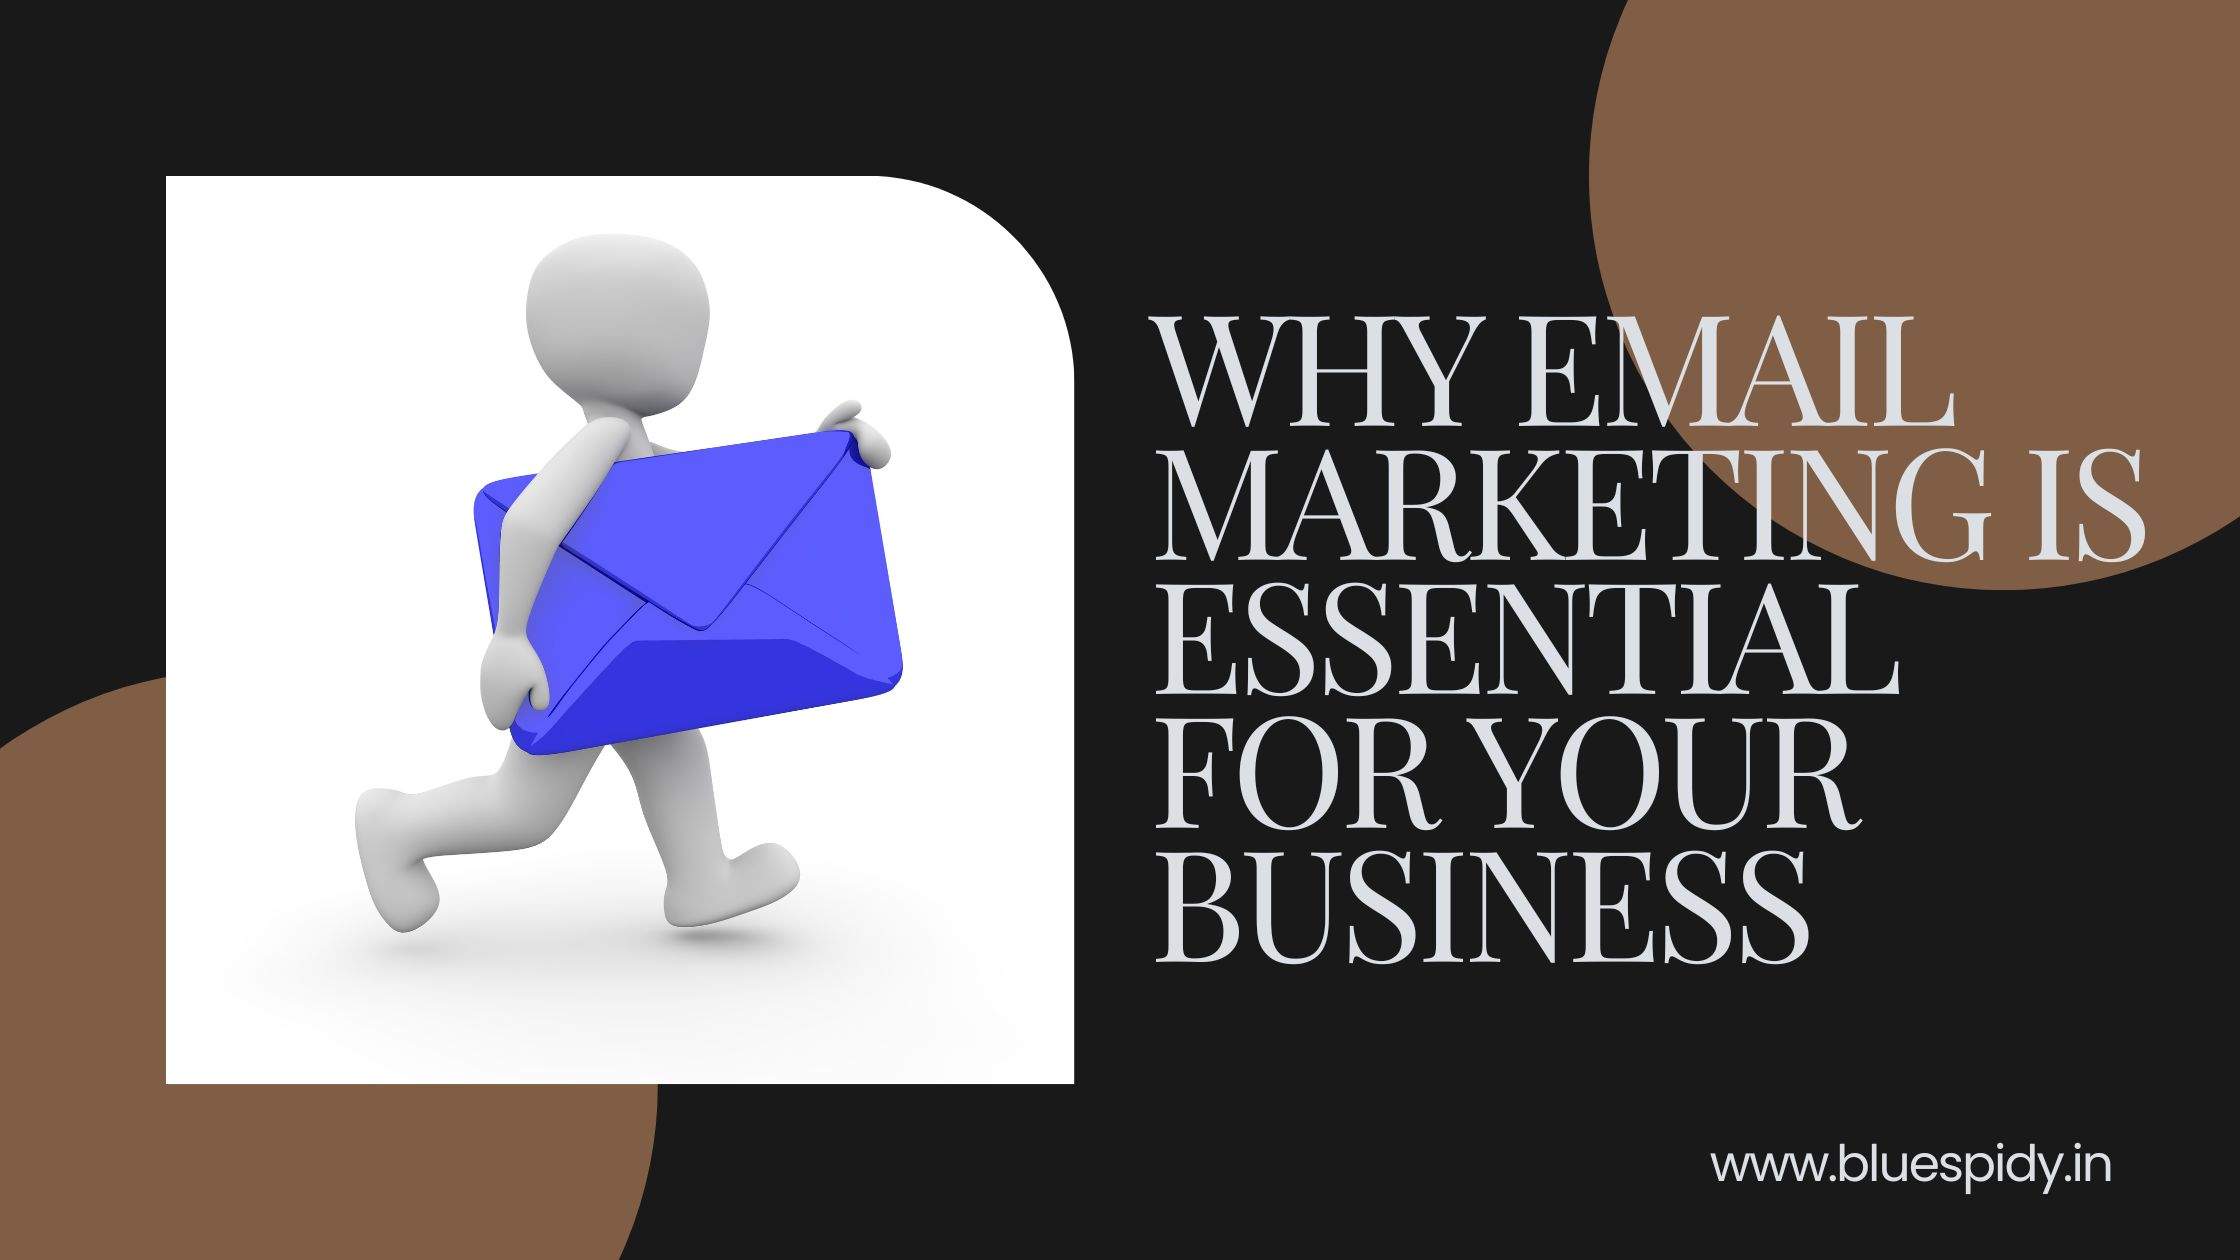 Why Email Marketing Is Essential for Your Business